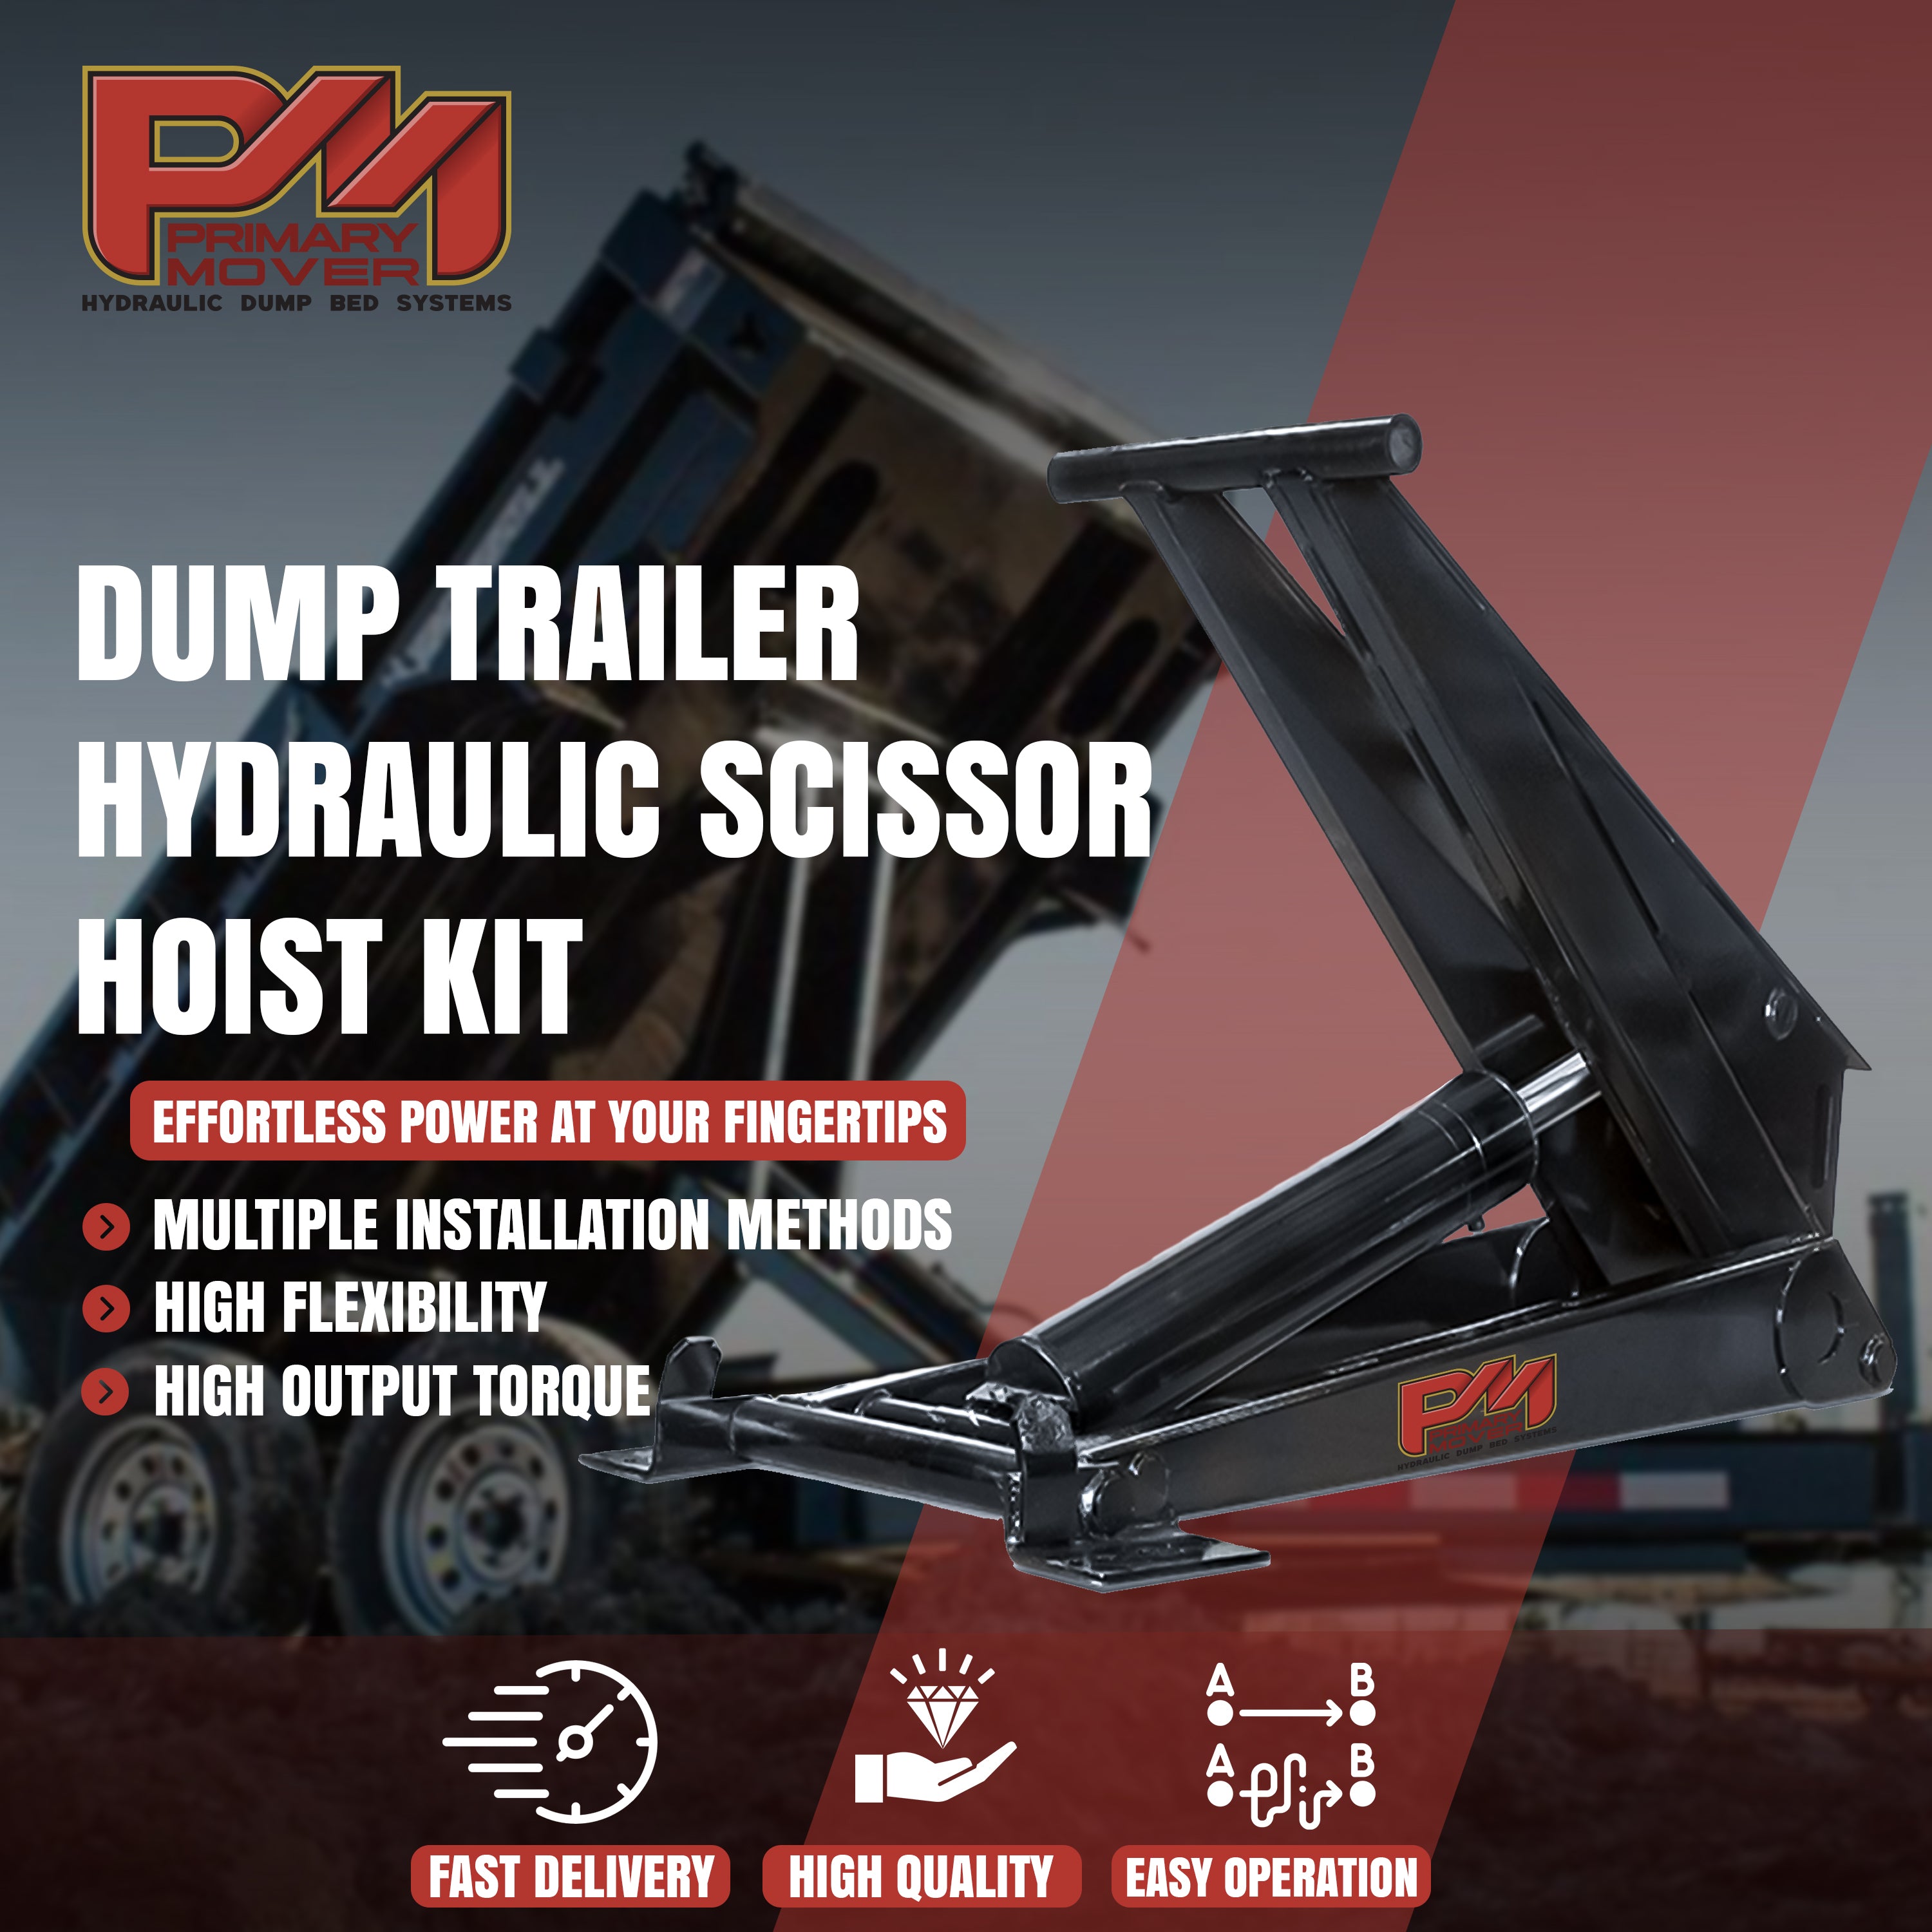 Hydraulic Scissor Hoist Kit - 12 Ton Capacity - Fits 18-24' Dump Body | PF-630: Black metal scissor lifter with red and white text, suitable for dump trailers. Includes cylinder, mounting brackets, hydraulic pump, and more.